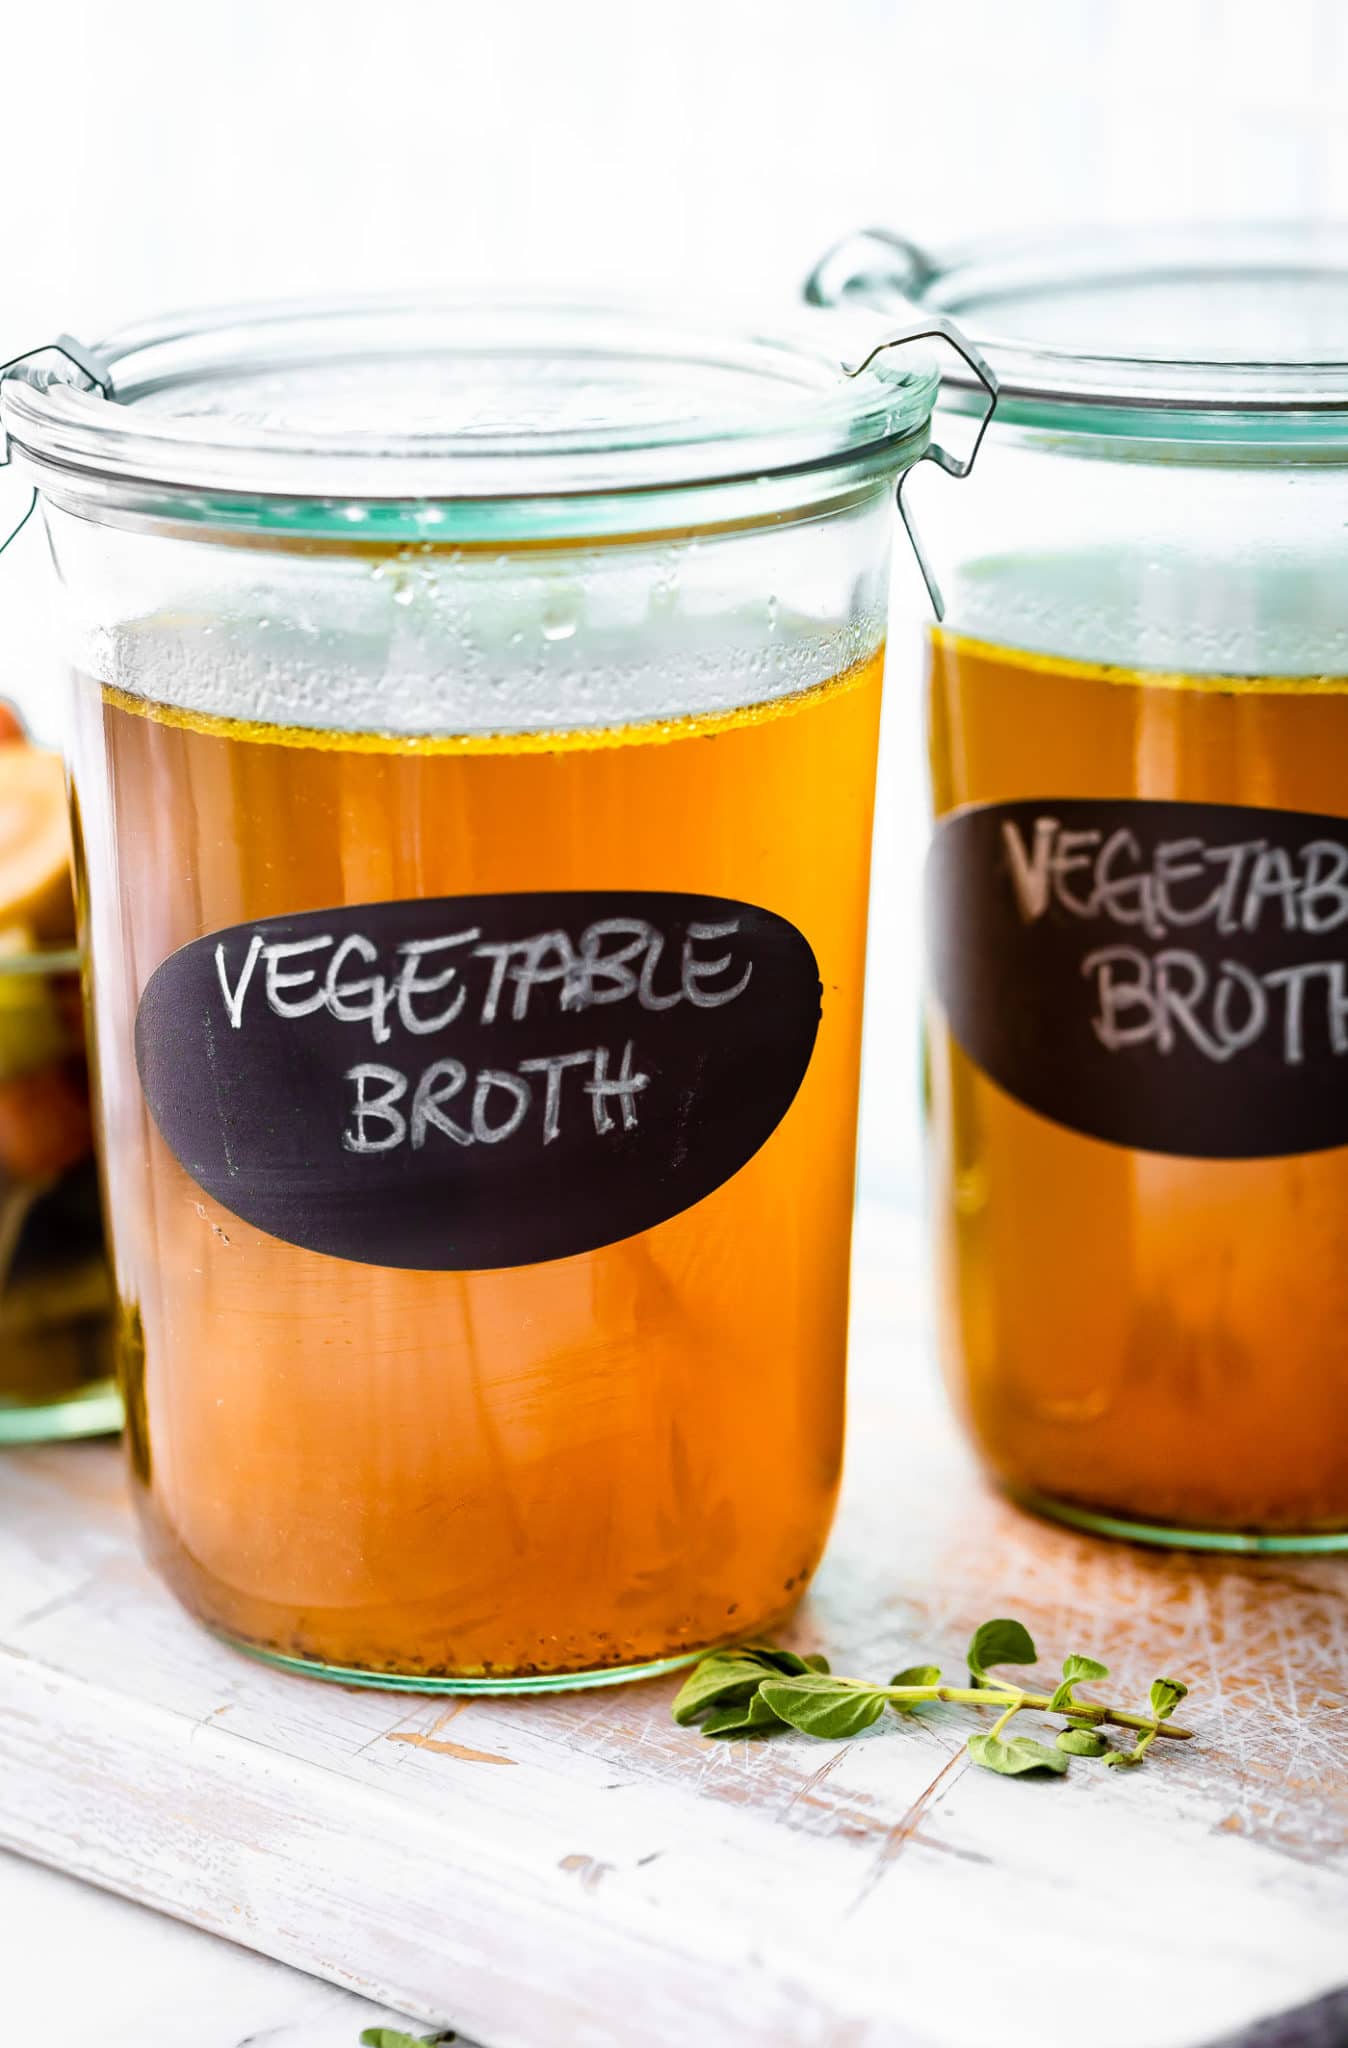 glass jars of homemade vegetable broth with "vegetable broth" written in white.